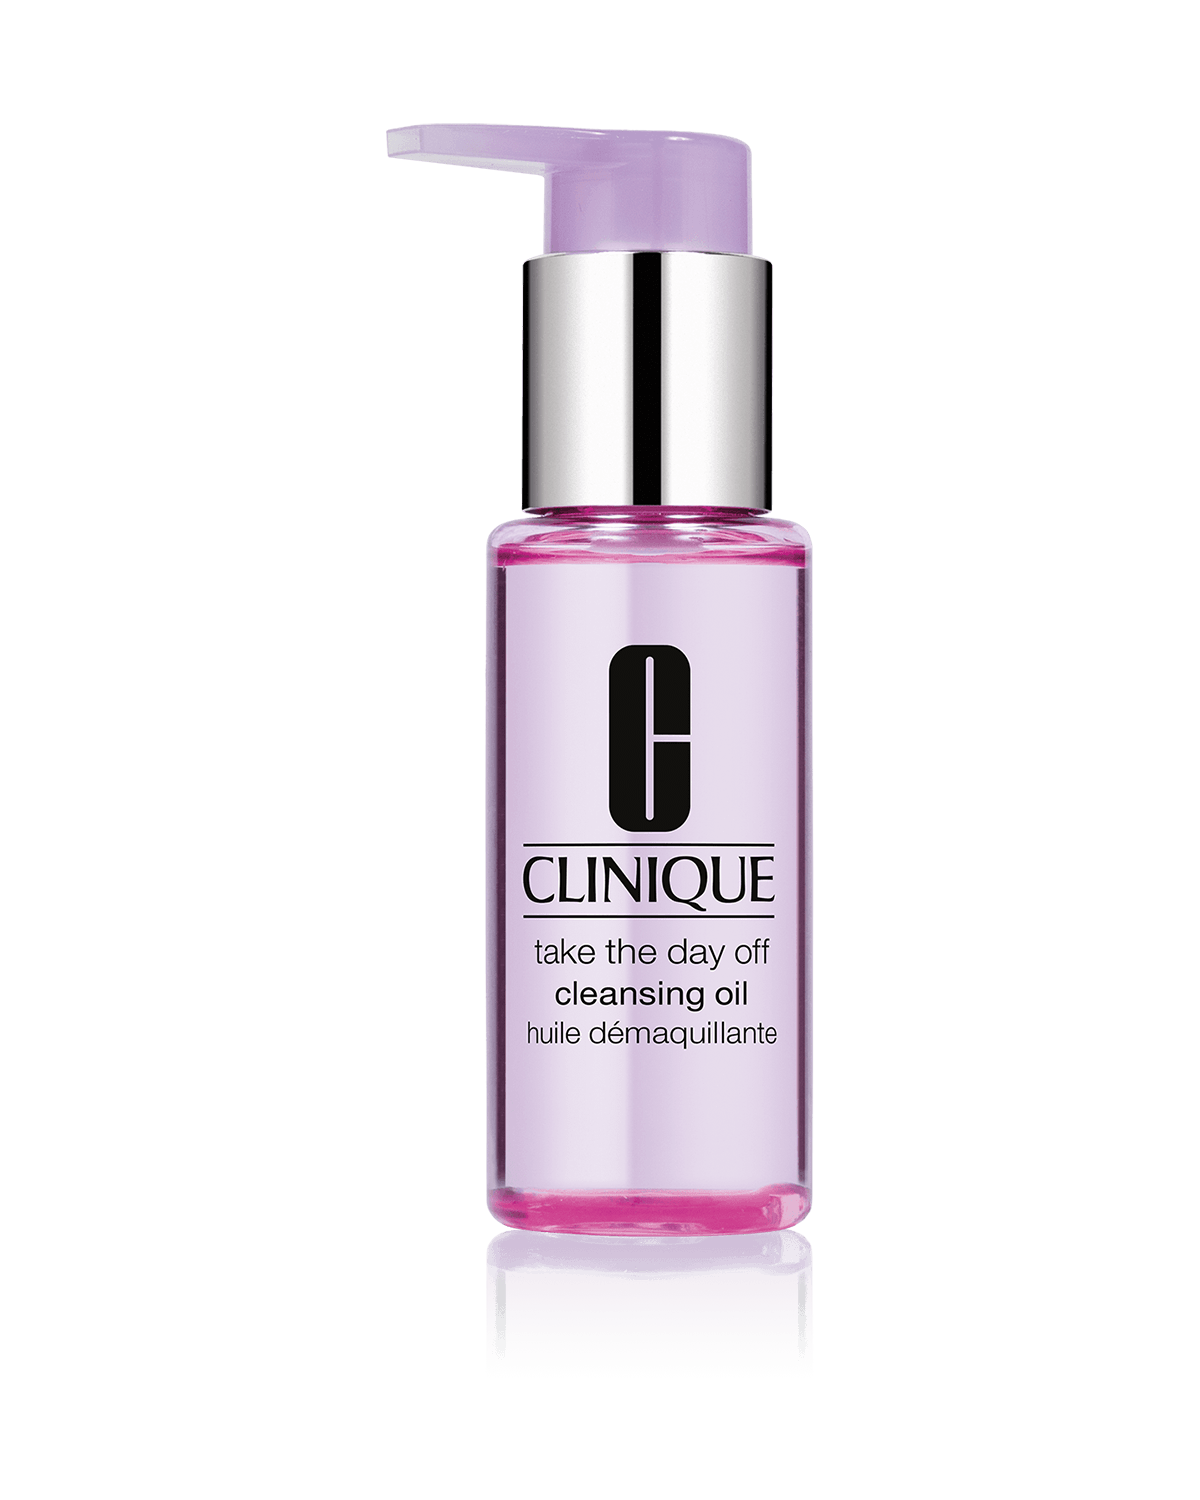 Take the day off cleansing. Clinique Oil. Clinique take the Day off Cleansing Oil. Clinique Cleanser. Clinique take the Day off.